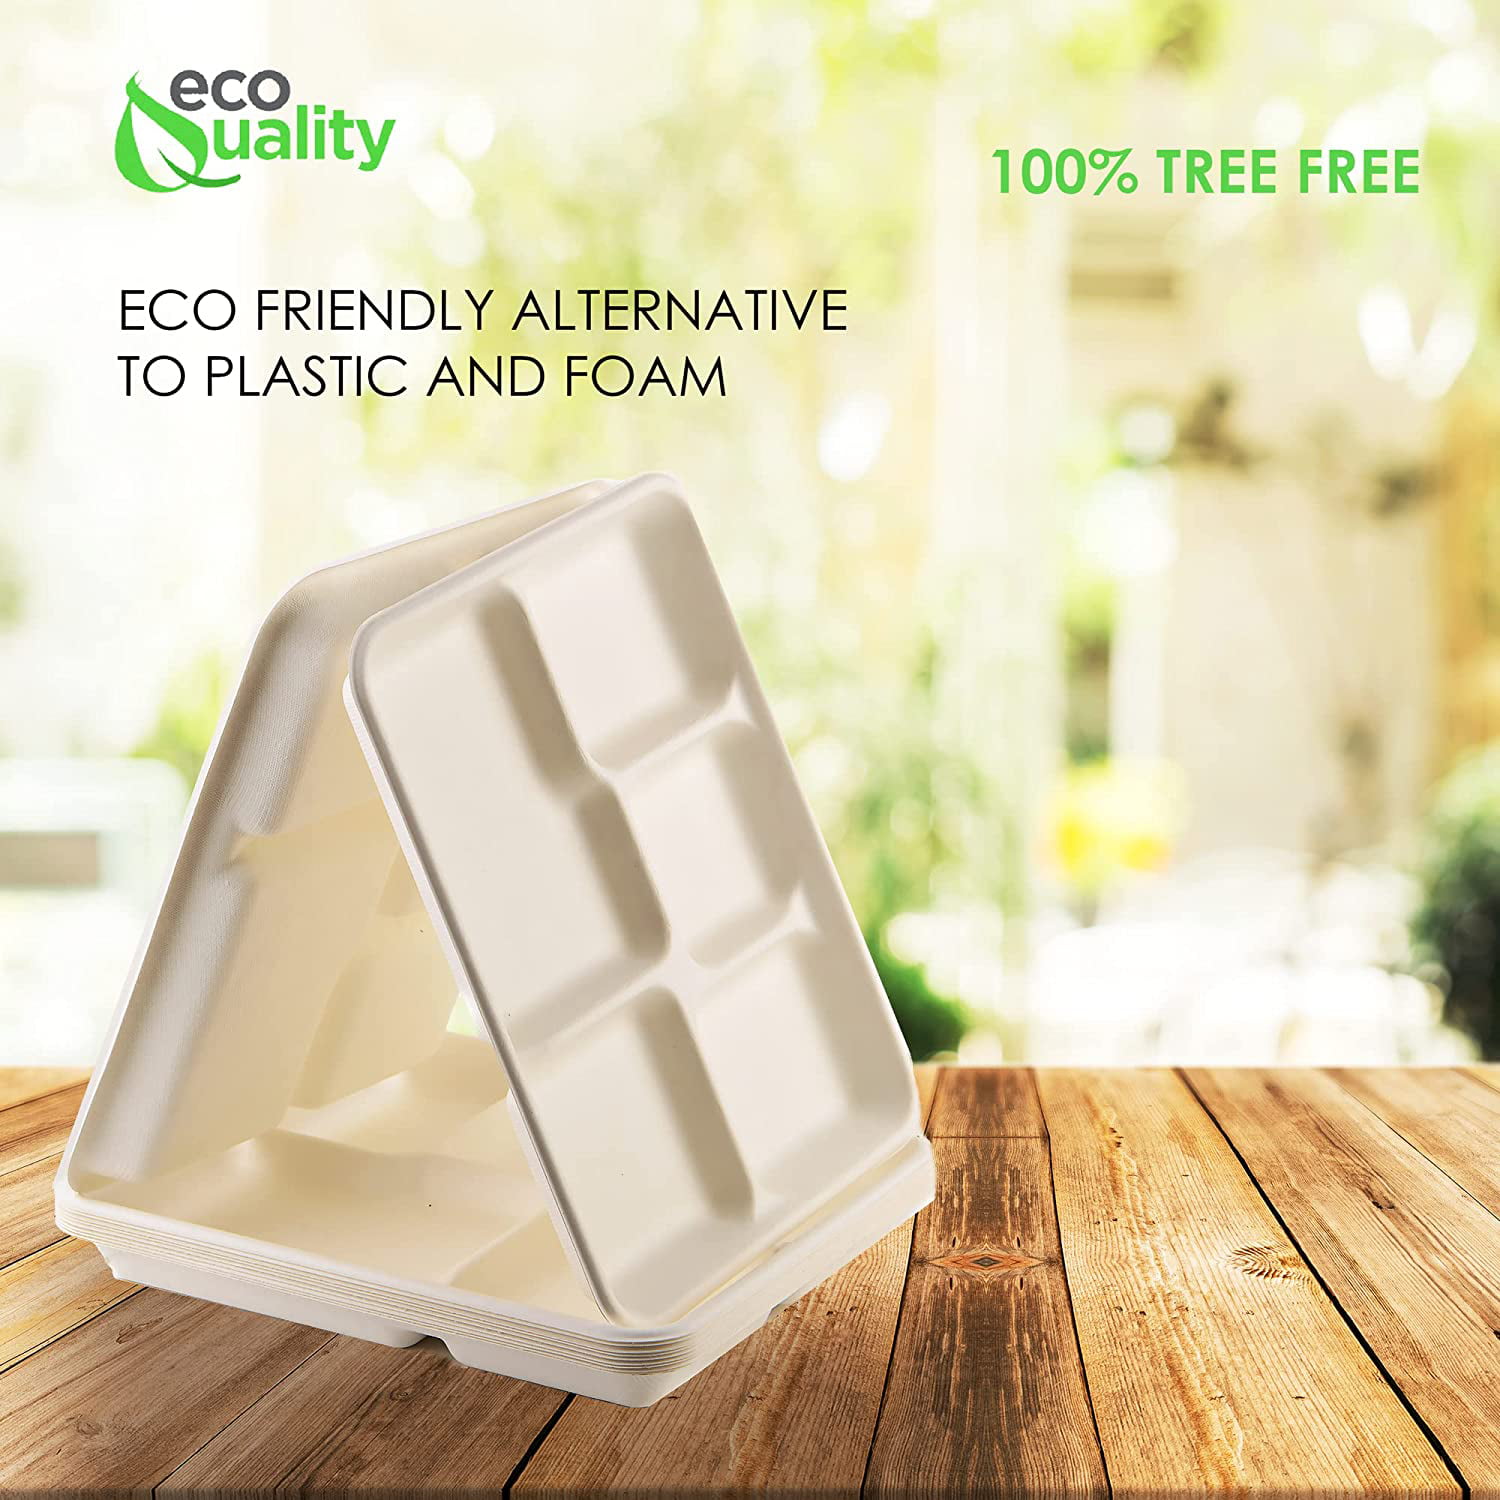 5 Compartment Meal Tray with Lid, 100?o Friendly, Biodegradable &  Disposable Compartment Meal Tray with Smart Lock